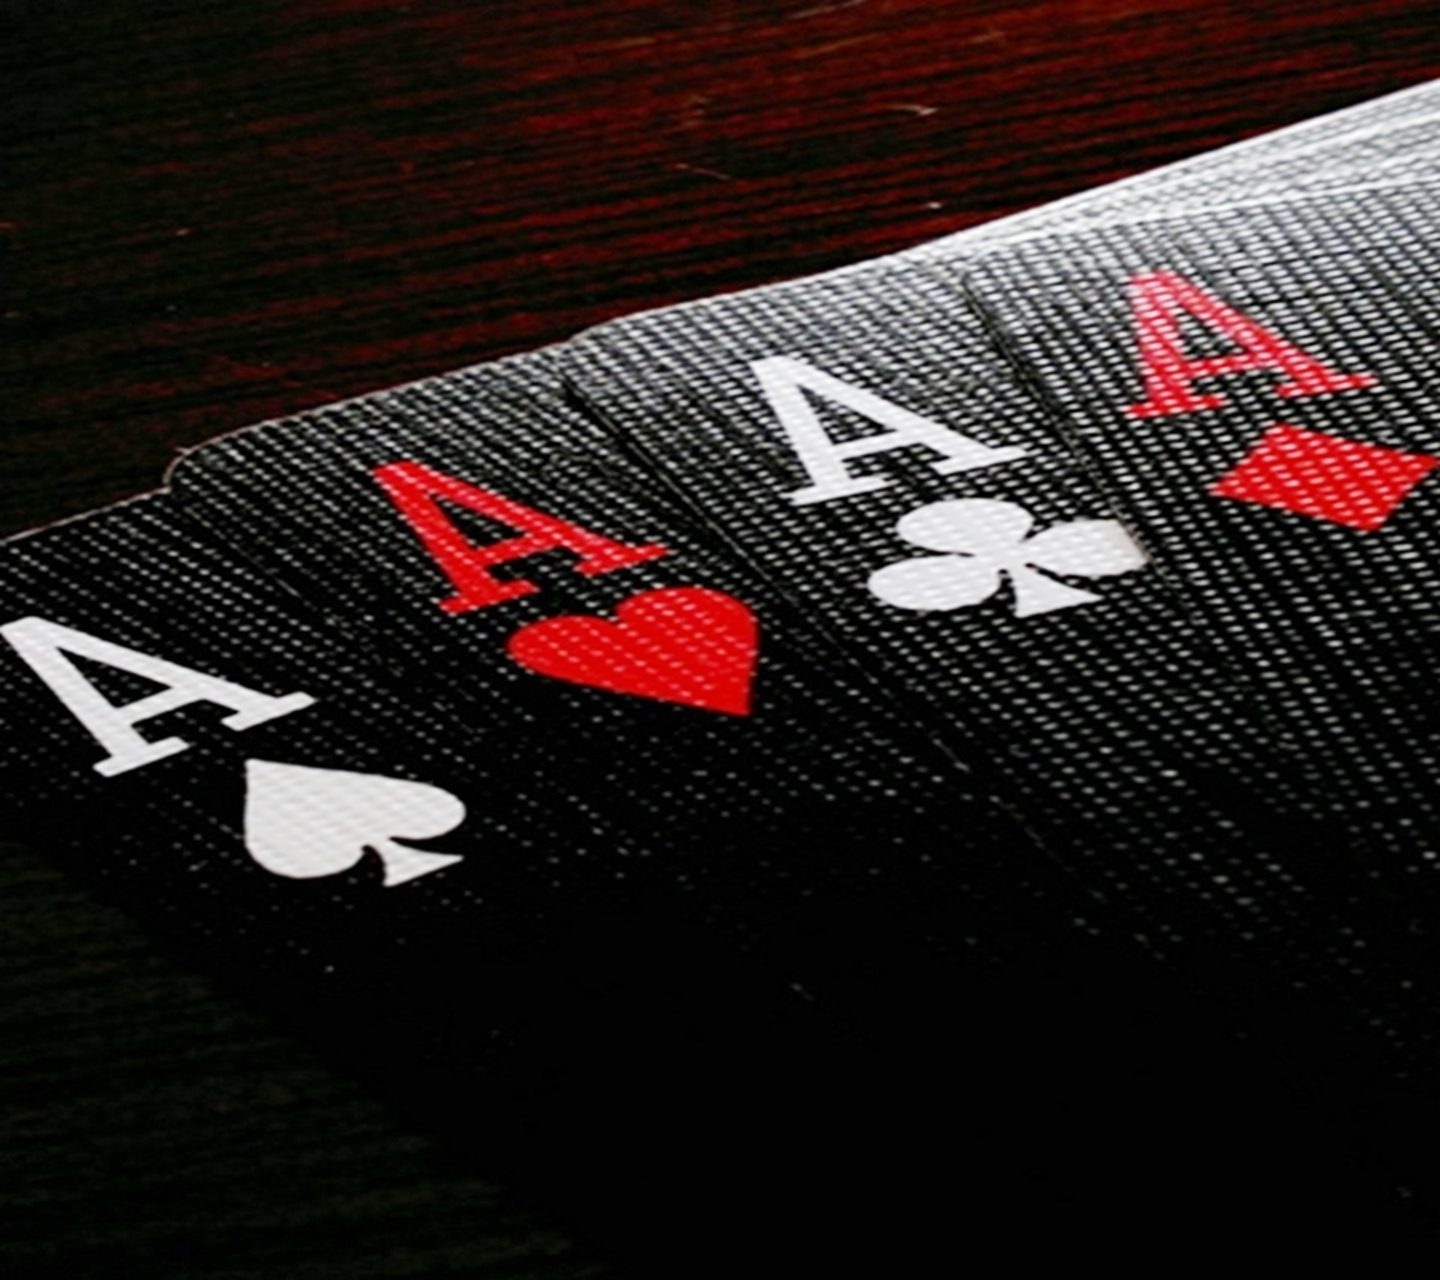 Aces Cards Phone Wallpaper Awesome For Phones Photo